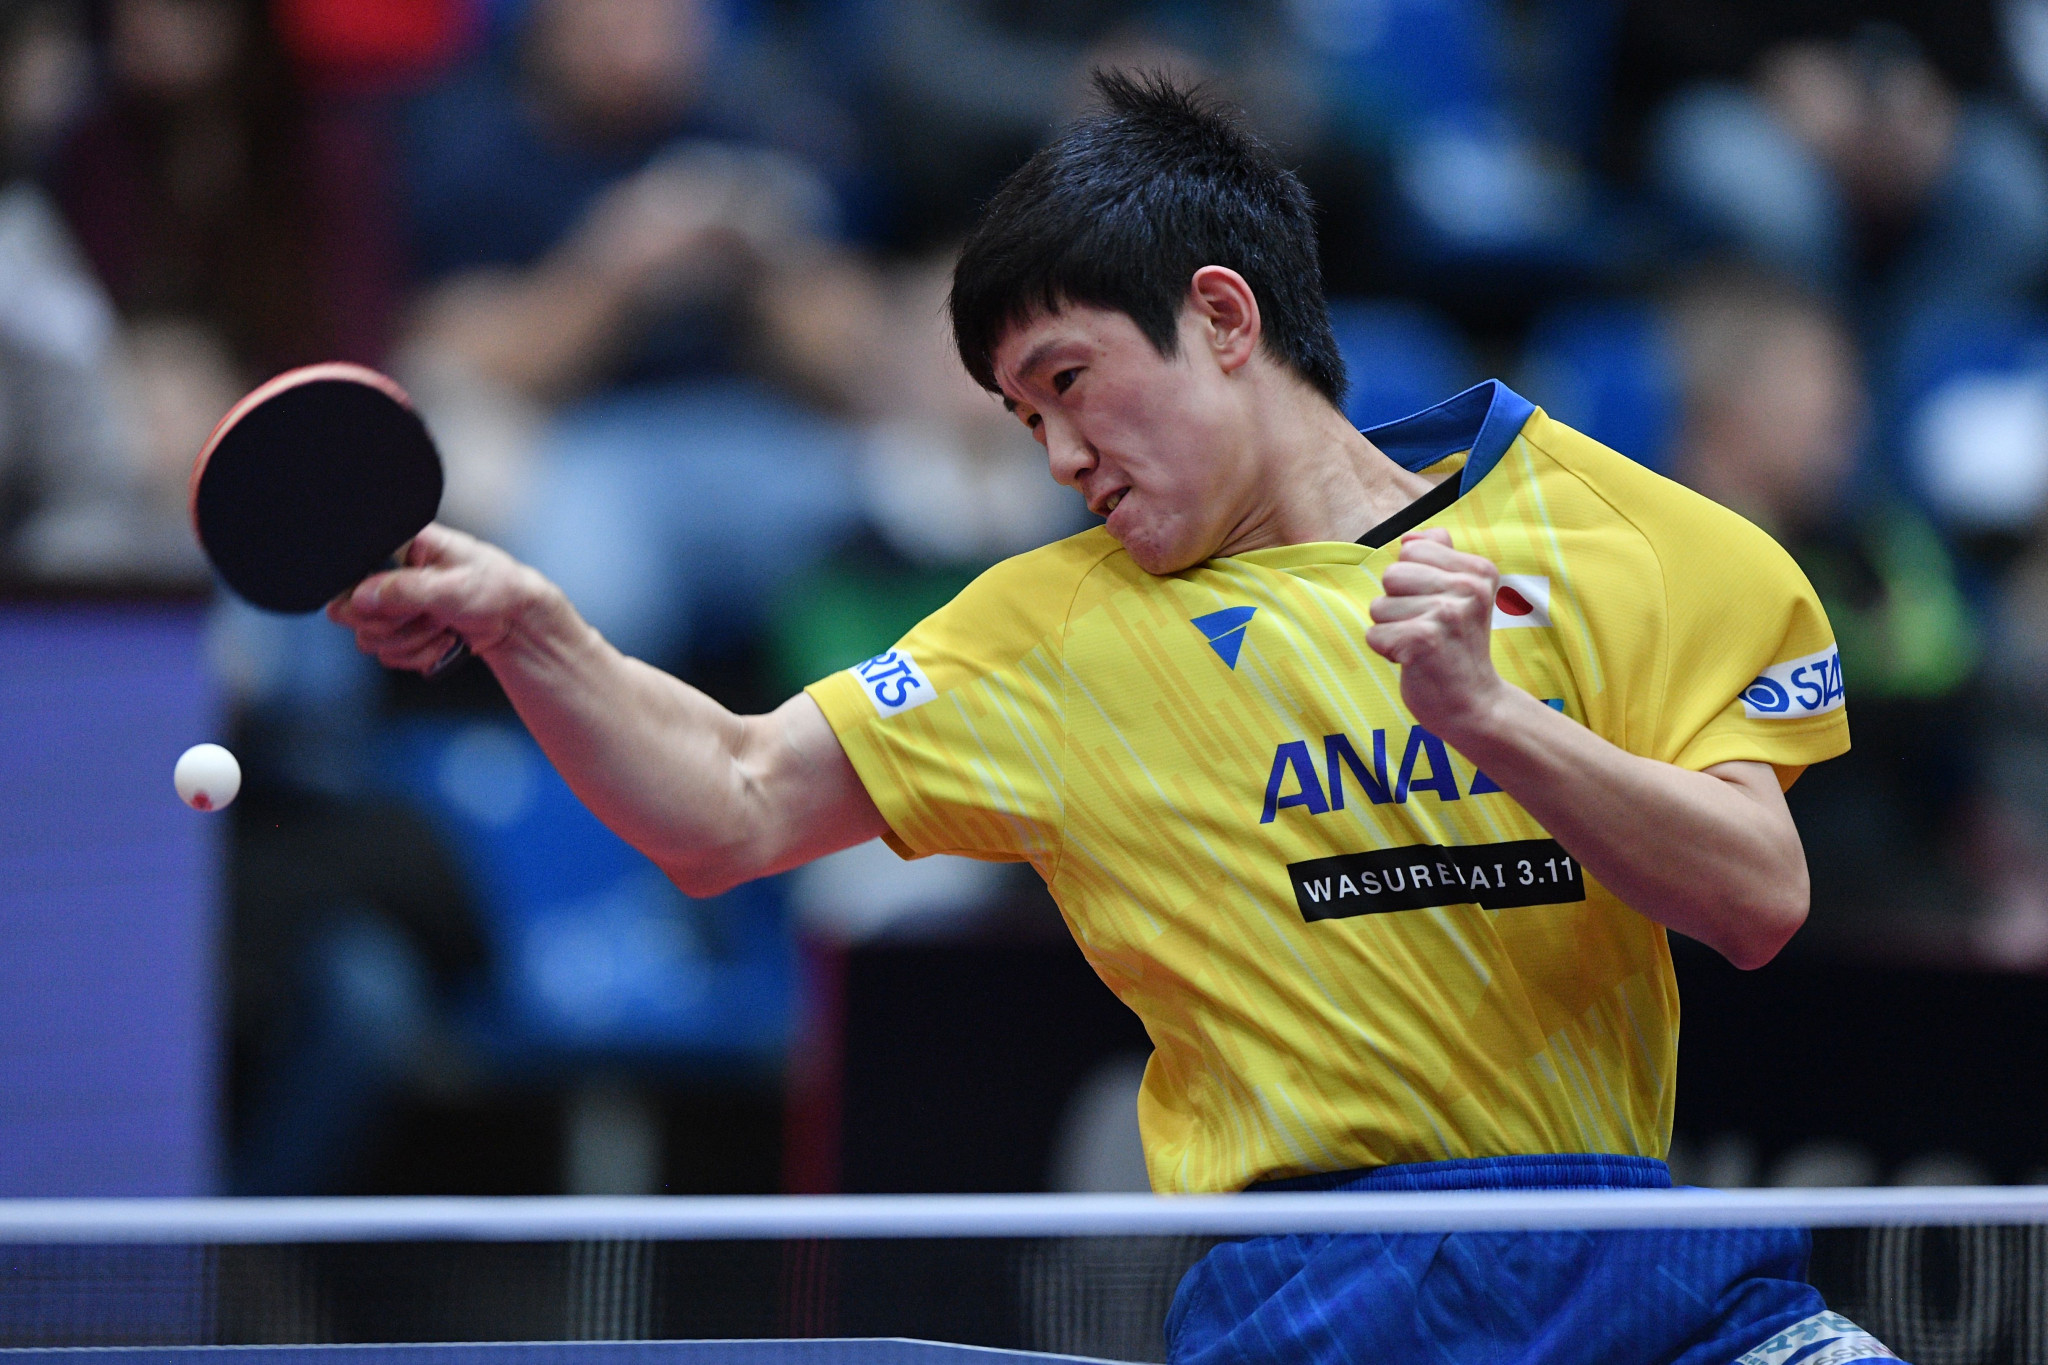 Men's singles top seed Tomokazu Harimoto reached the last eight on a successful day for Japan ©Getty Images